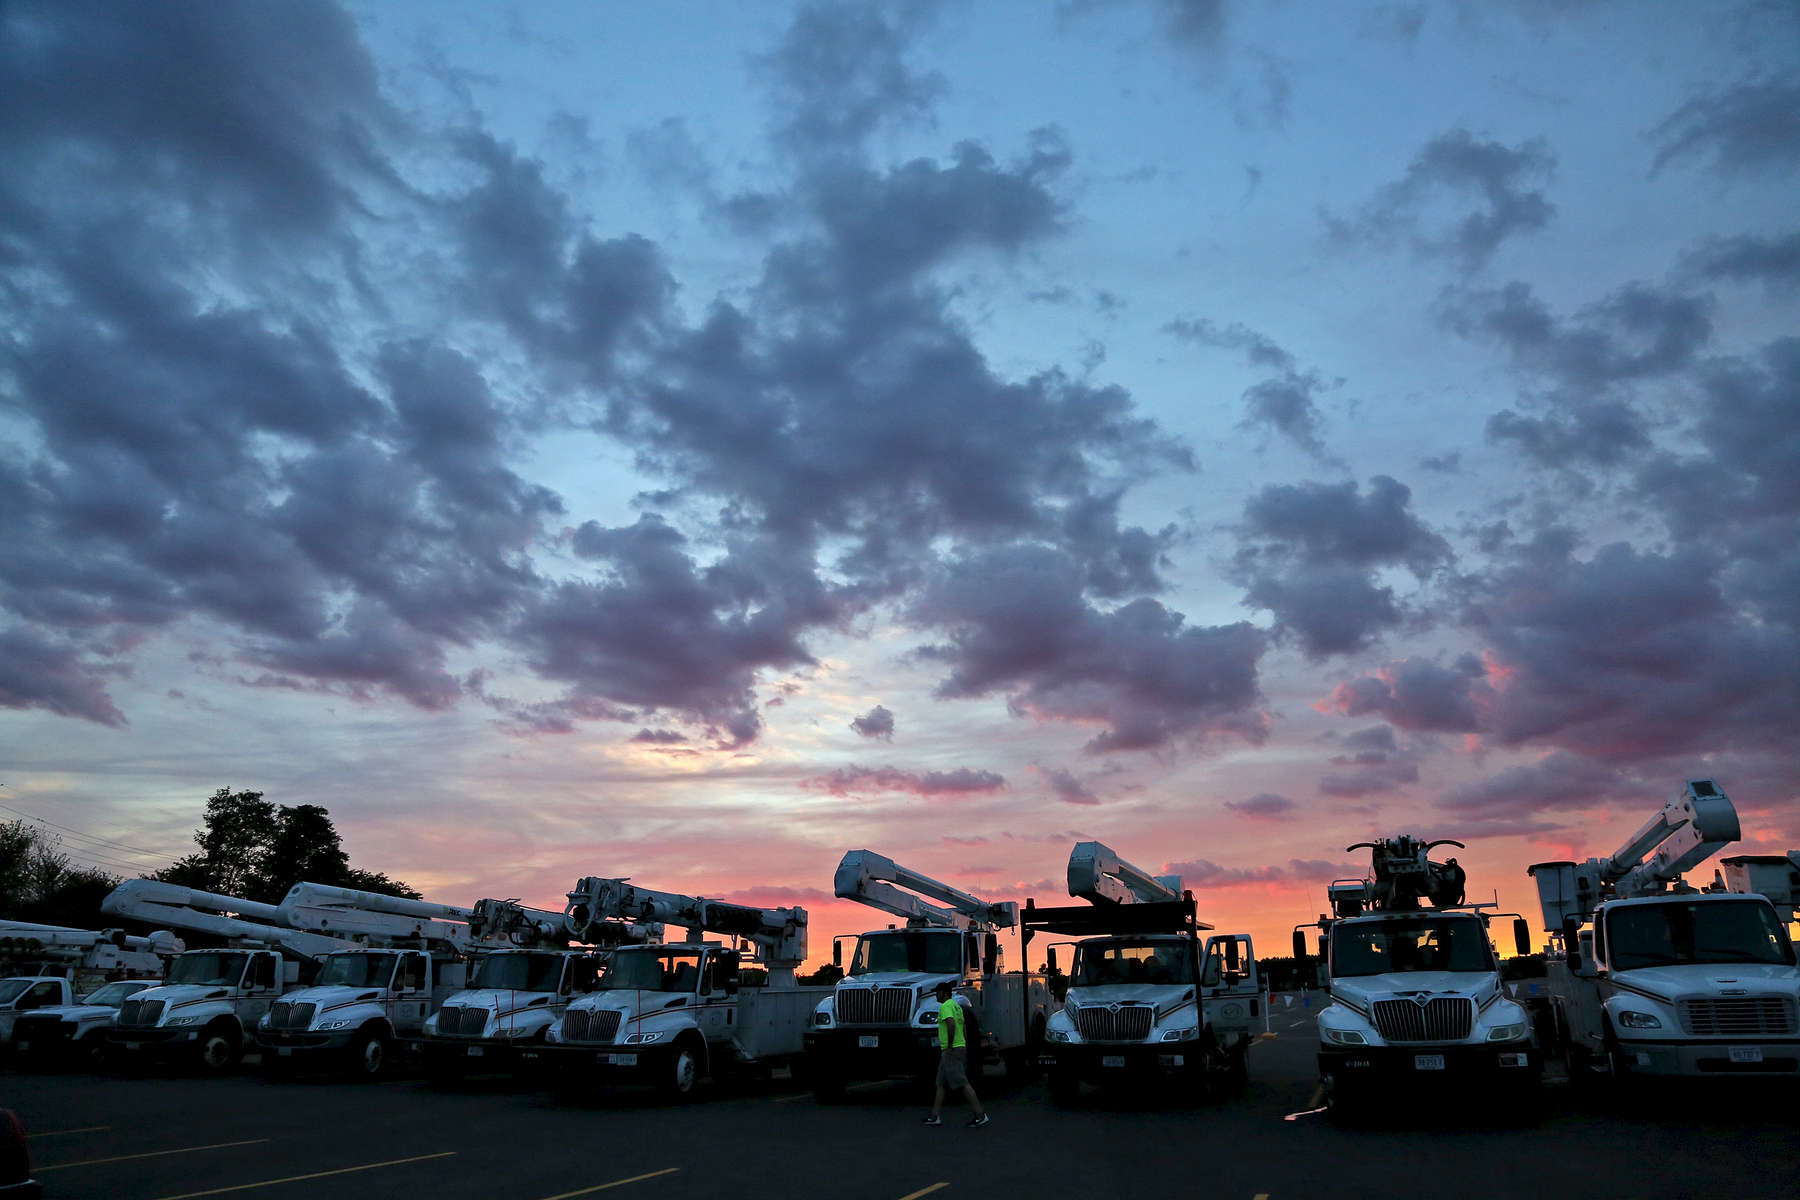 Trucks from Ohio Edison arrive at  Monmouth Park Racetrack in Oceanport, New Jersey on Friday September 2, 2016 to support Jersey Central Power & Light in preparation for Hurricane Hermine.